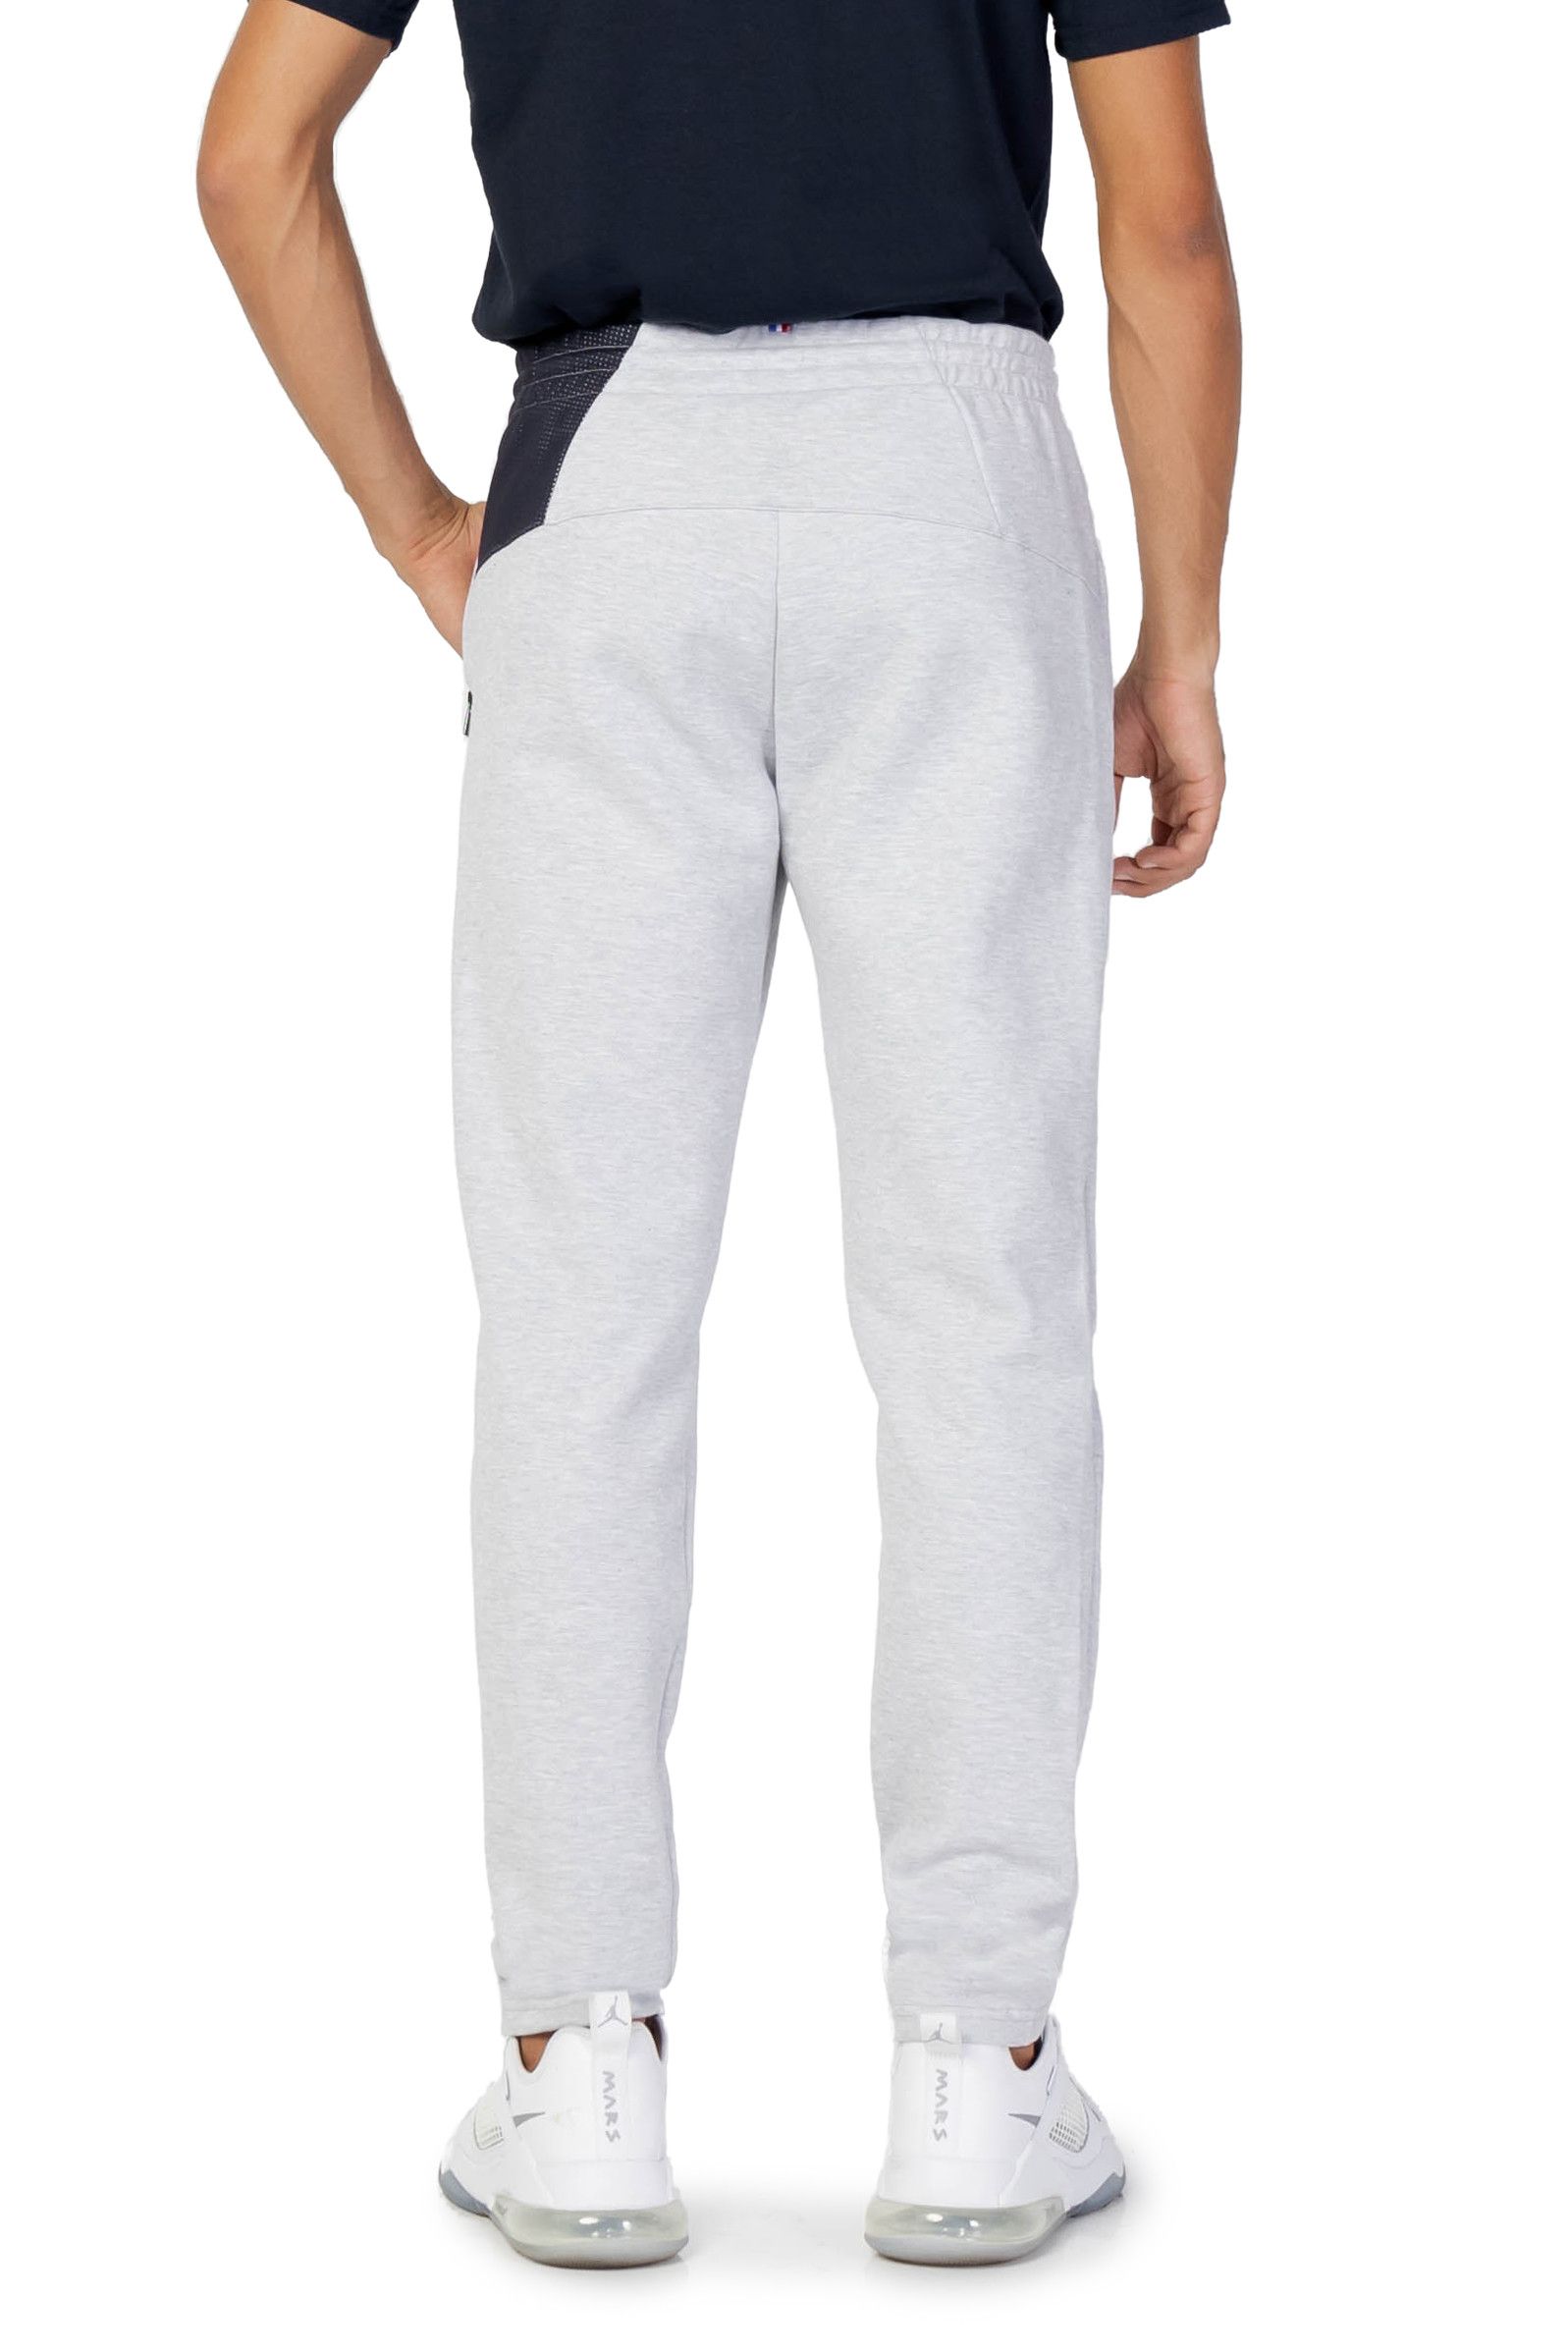 Brand: Le Coq Sportif
Gender: Men
Type: Trousers
Season: Fall/Winter

PRODUCT DETAIL
• Color: grey
• Pattern: plain
• Pockets: side pockets

COMPOSITION AND MATERIAL
• Composition: -9% lycra -16% polyester -75% viscose 
•  Washing: machine wash at 30°